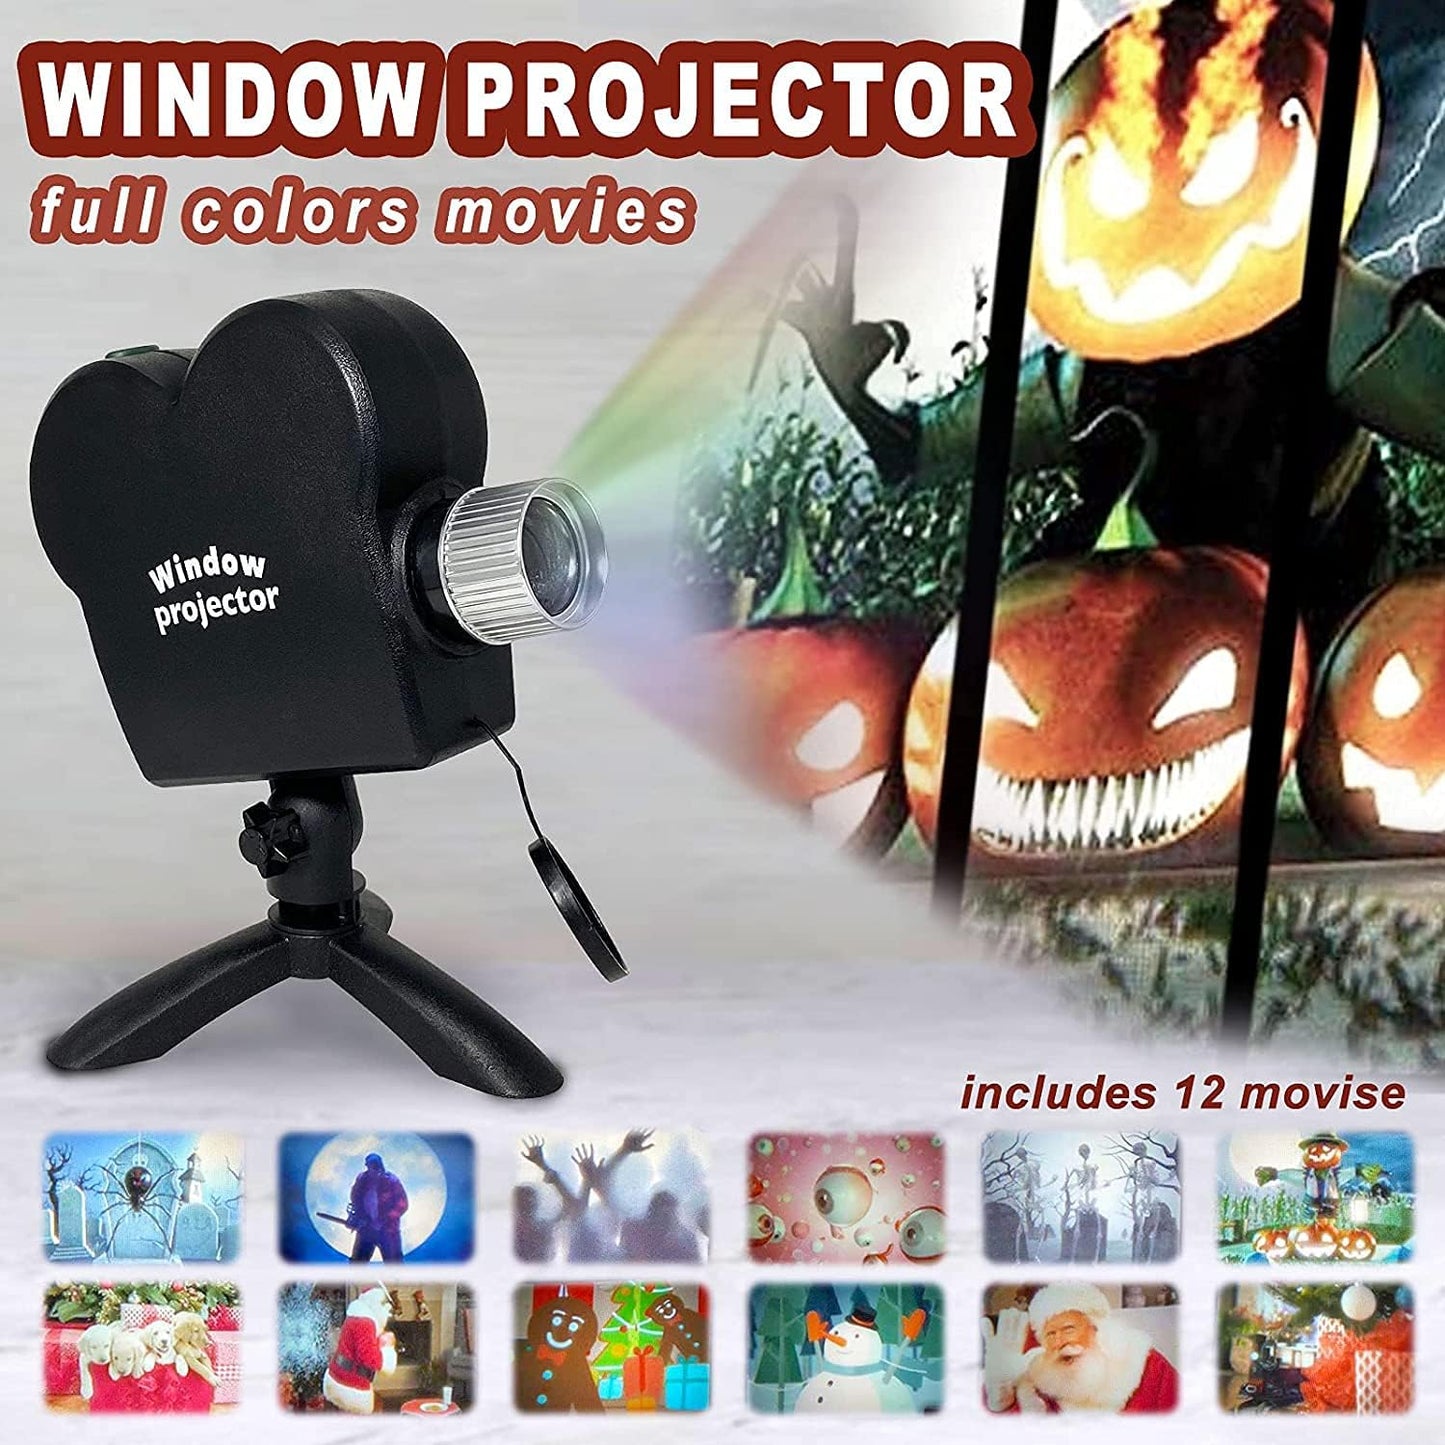 2024 Halloween Holographic Projector,Halloween Hologram Projector Christmas Window Projector Decorations,Lights Outdoor Portable Holographic Projection with Tripod,12 Movies Christmas Halloween